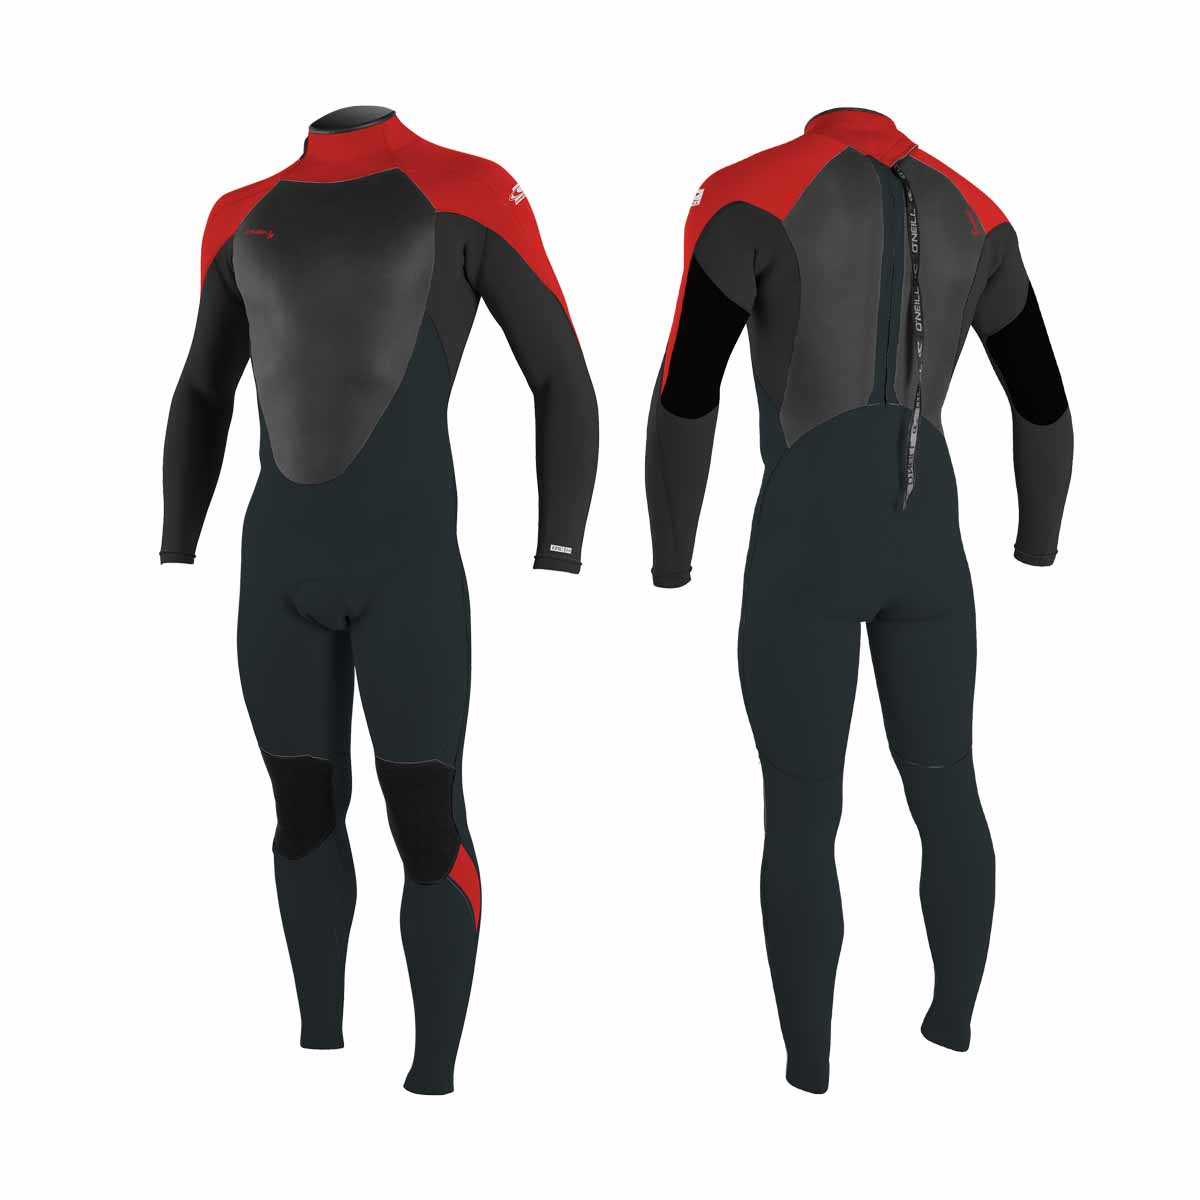 O'Neill Youth Epic full 4/3 mm Wetsuit – Gunmetal/Black/Red GS9